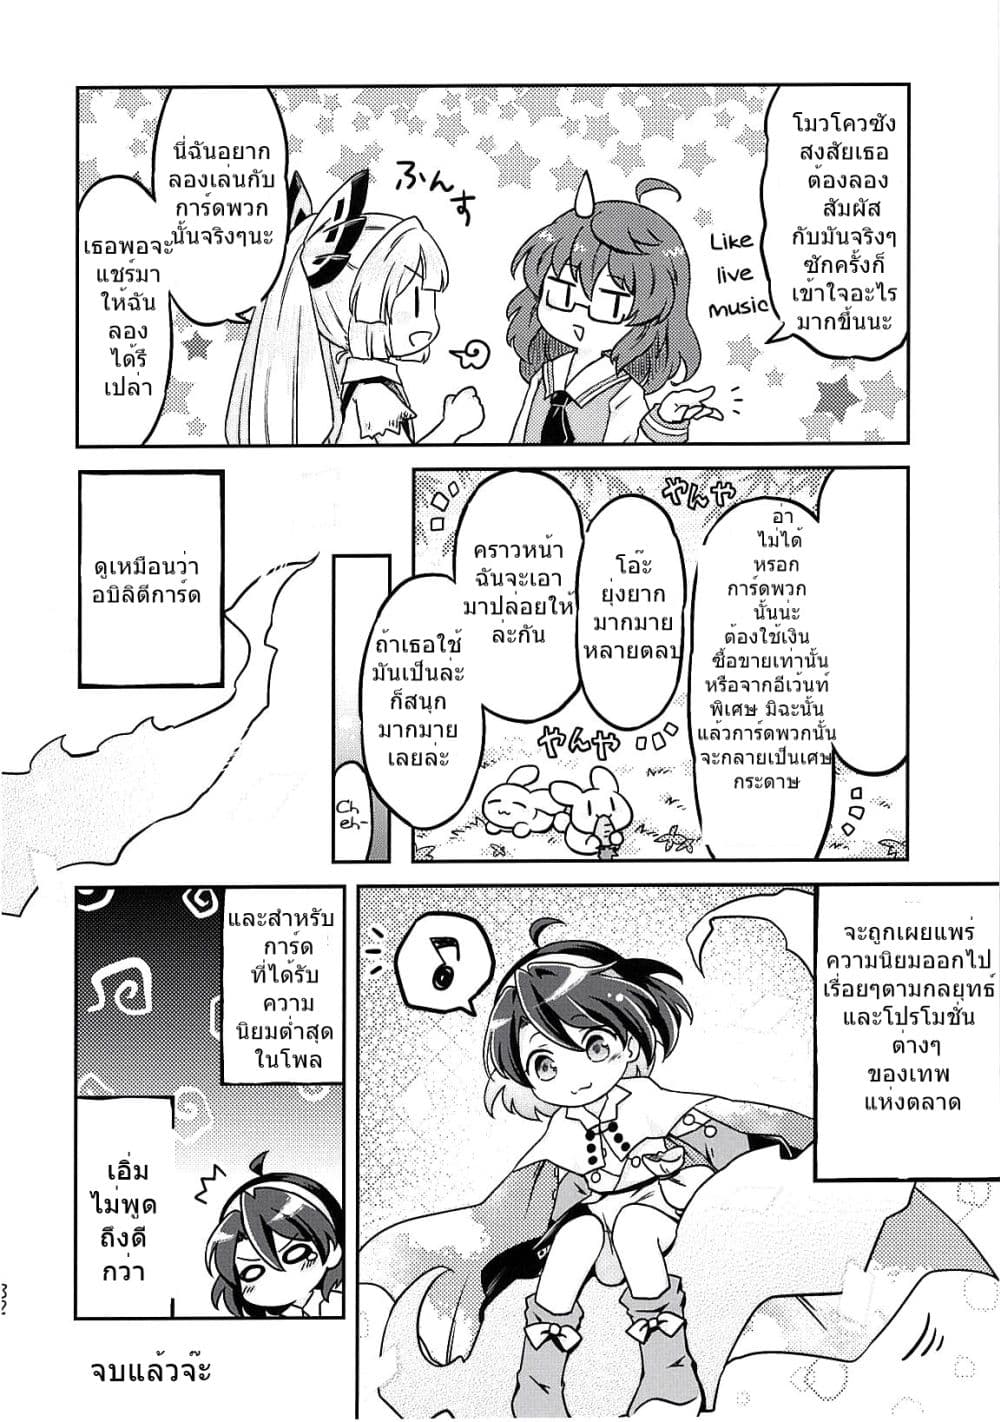 Touhou Project Chima Book By Pote ตอนที่ 2 (32)